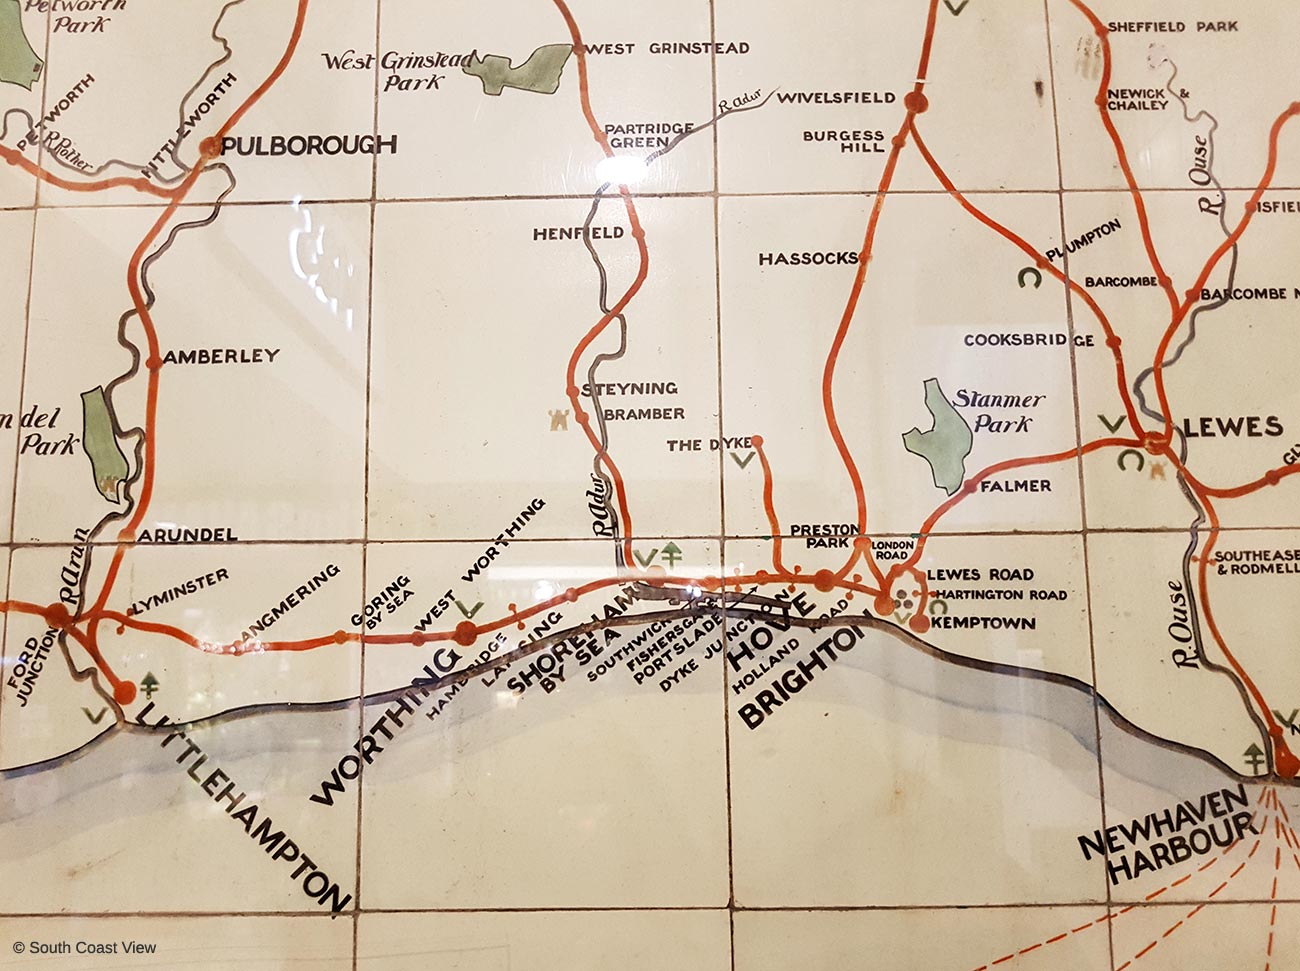 LBSCR detail showing routes along the south coast of England